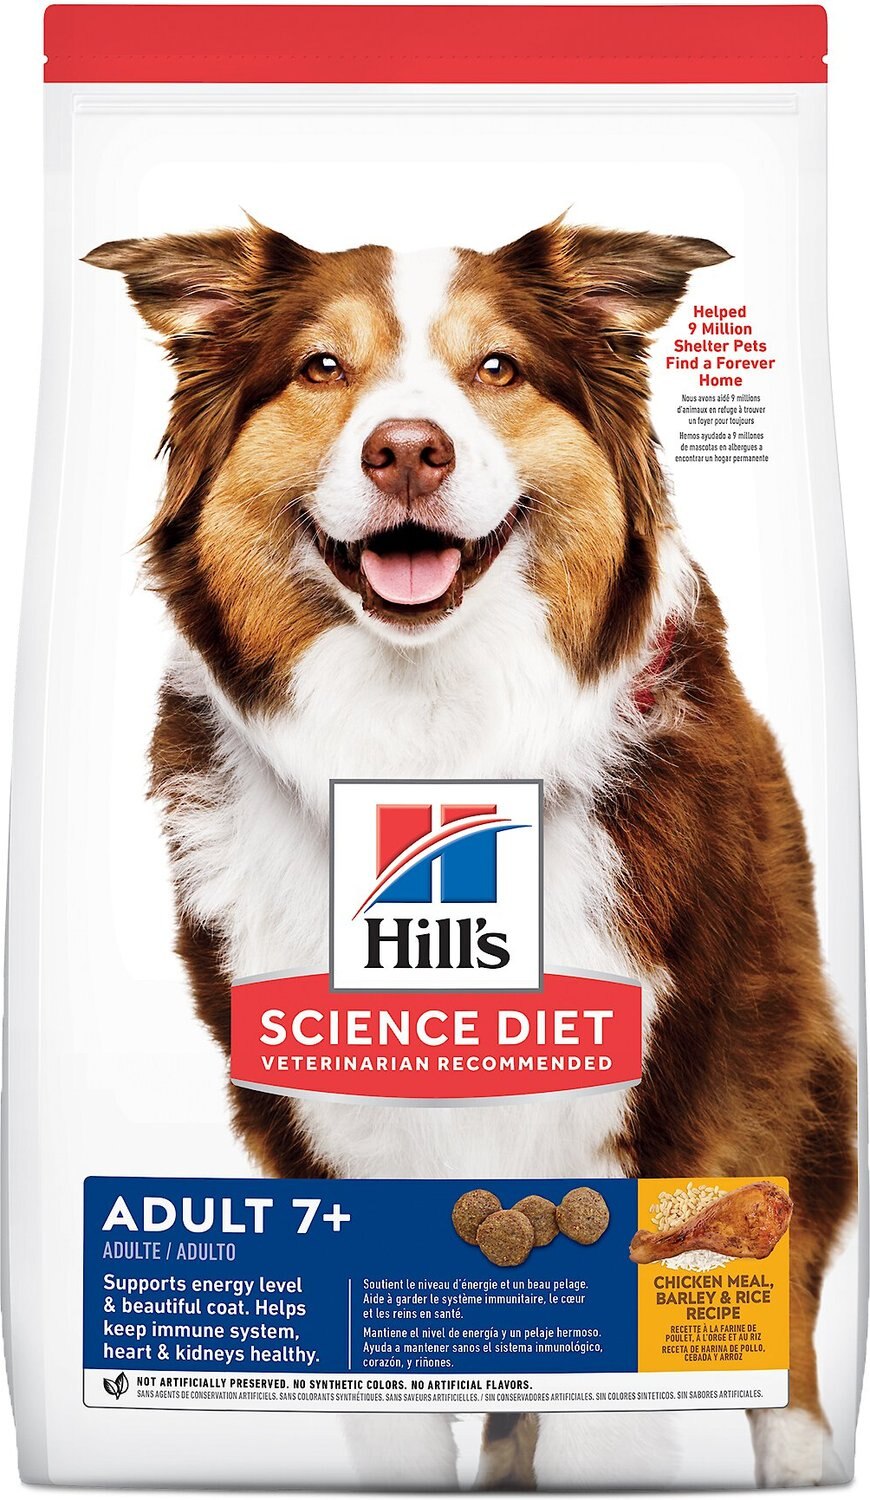 science diet large breed puppy food